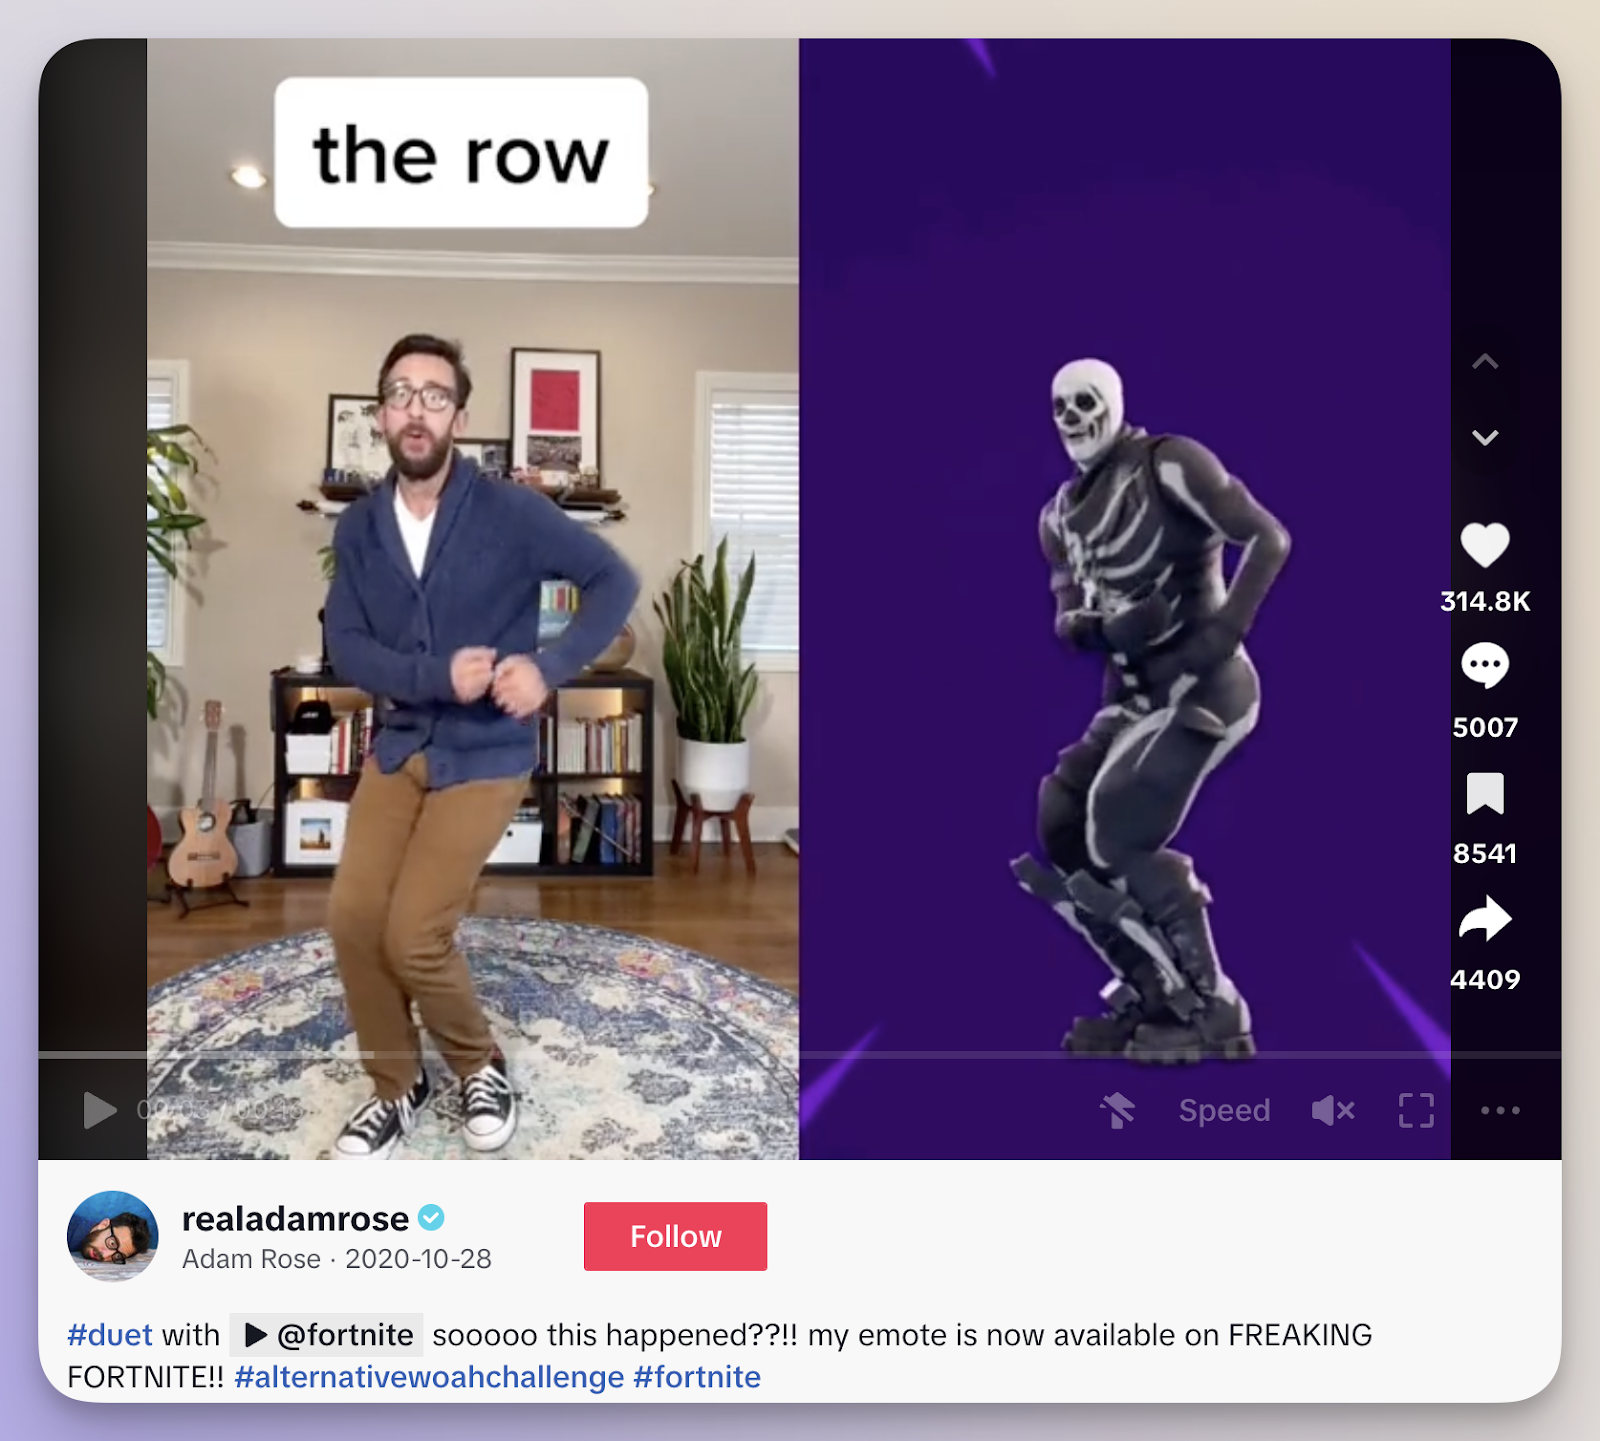 TikTok challenges are a sure way to boost discoverability. 